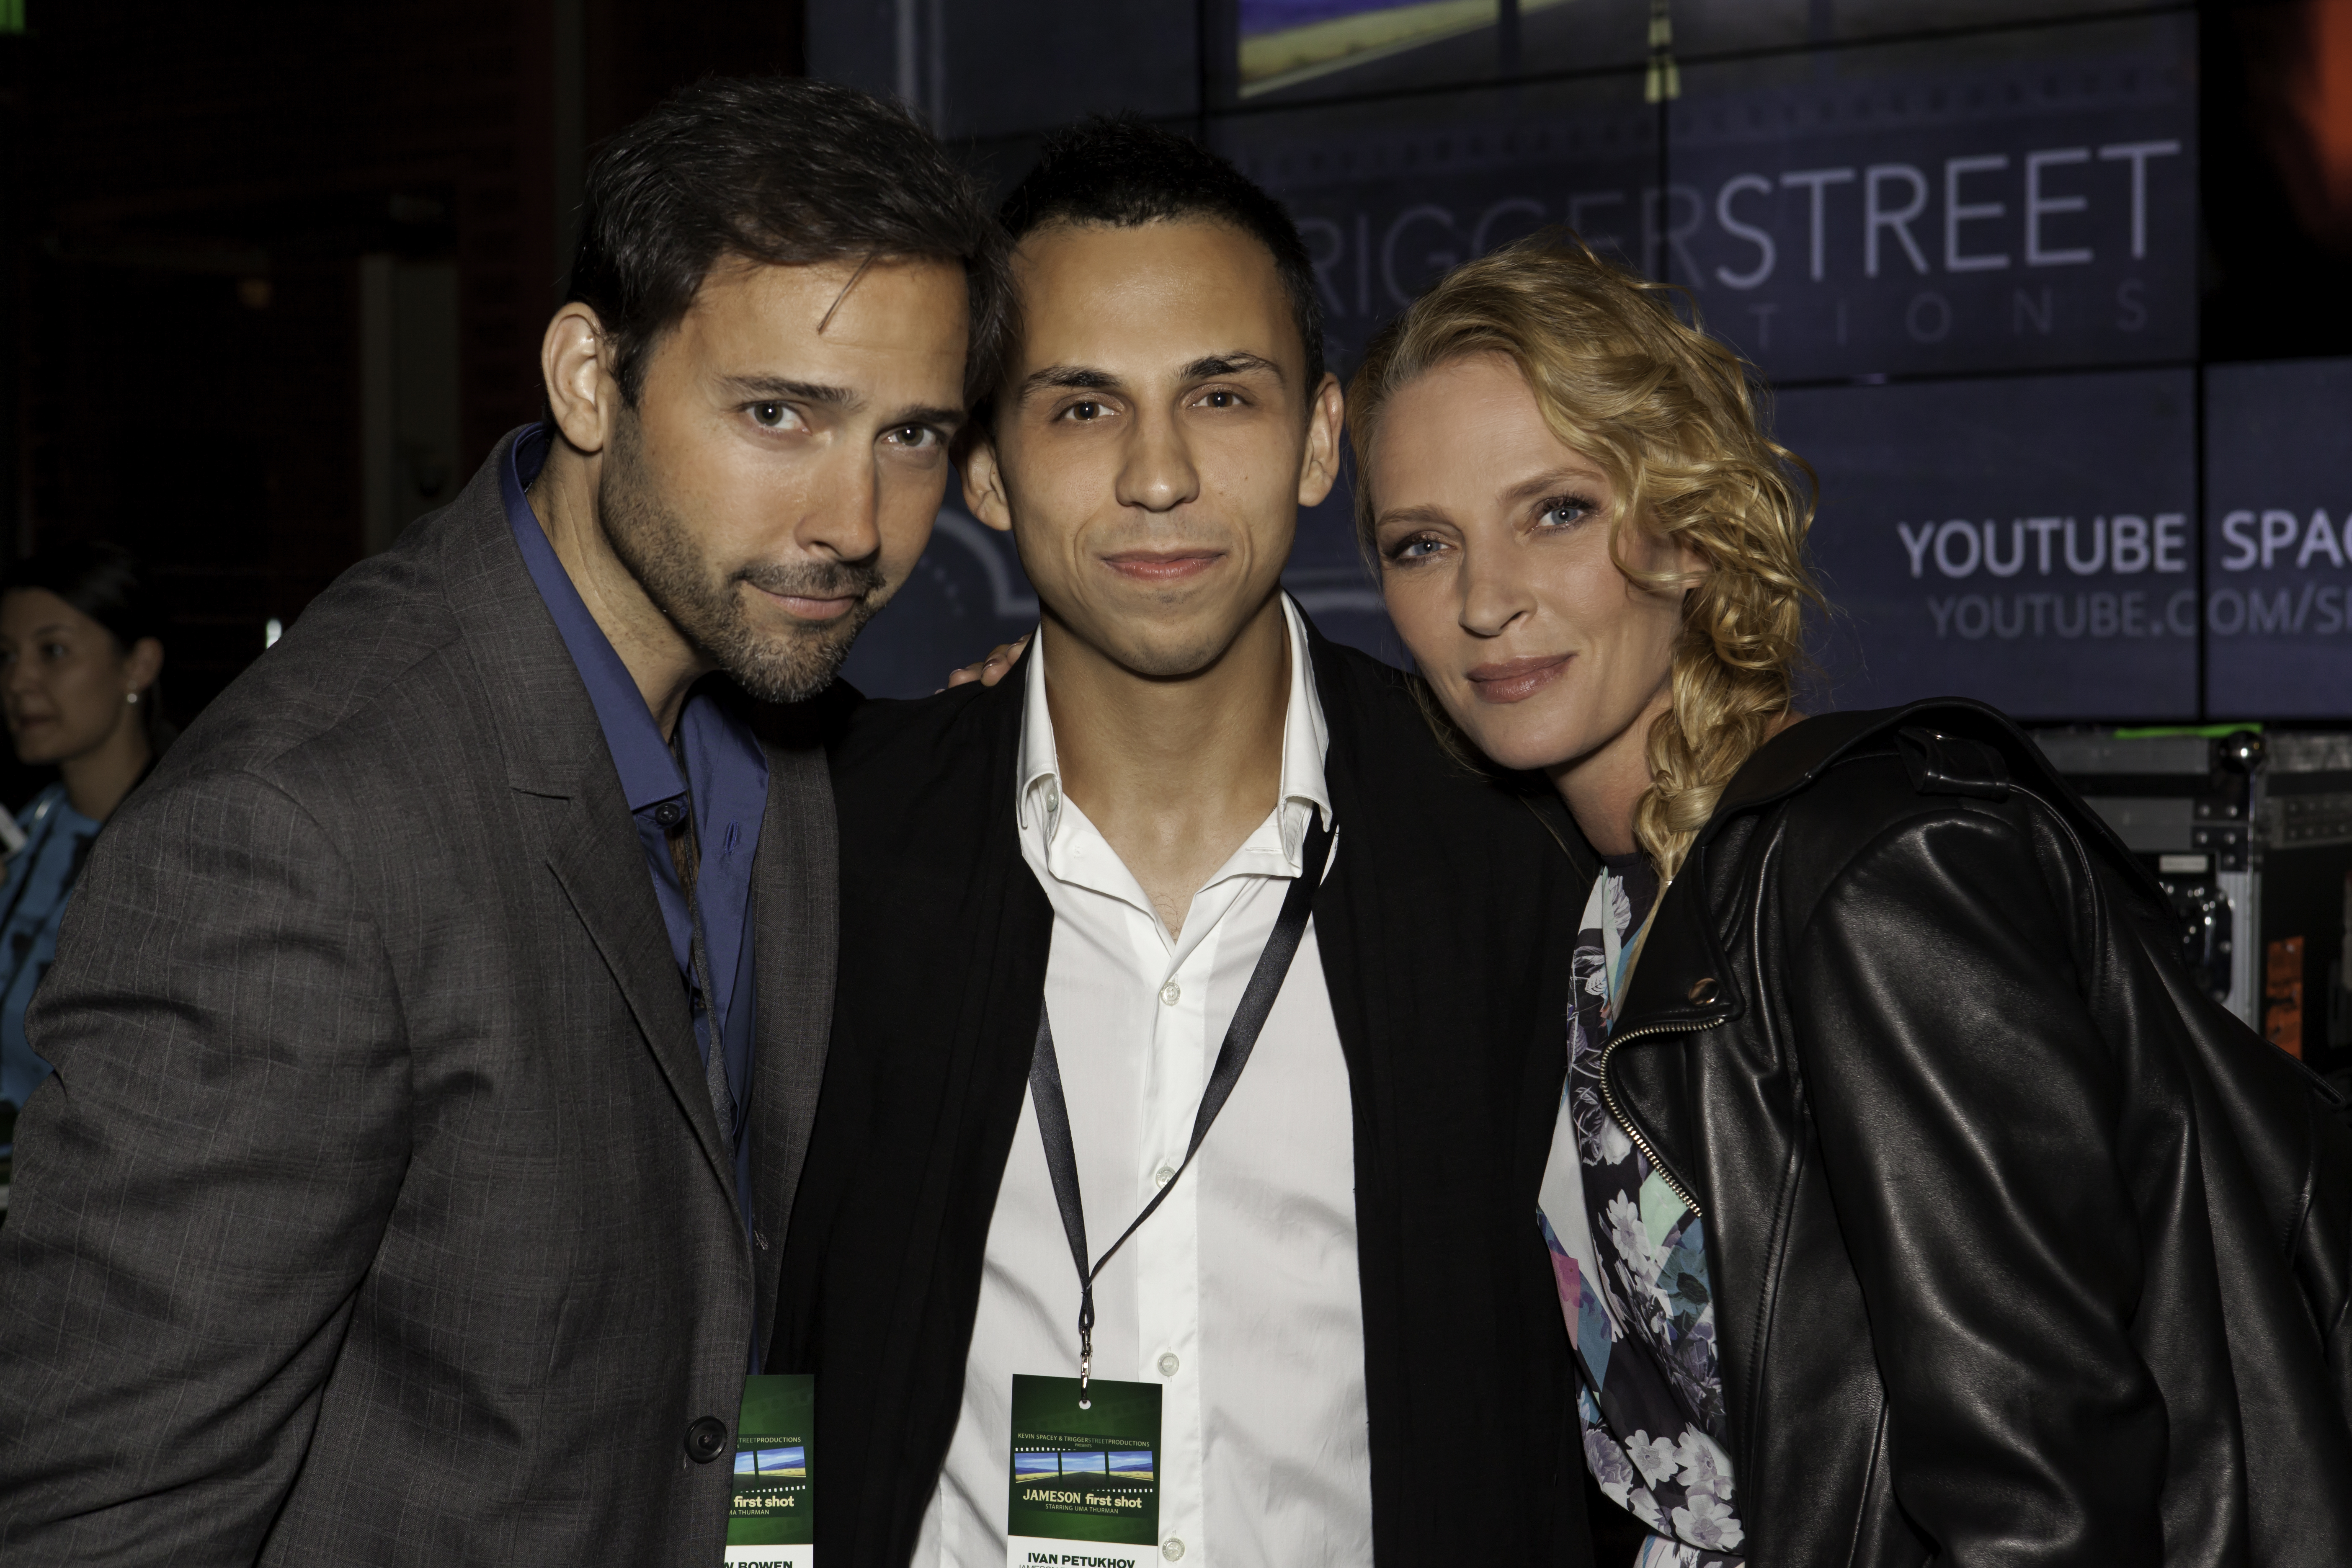 Uma Thurman at LA Jameson First Shot premier with THE GIFT director Ivan Petukhov and co-star Andrew Bowen.